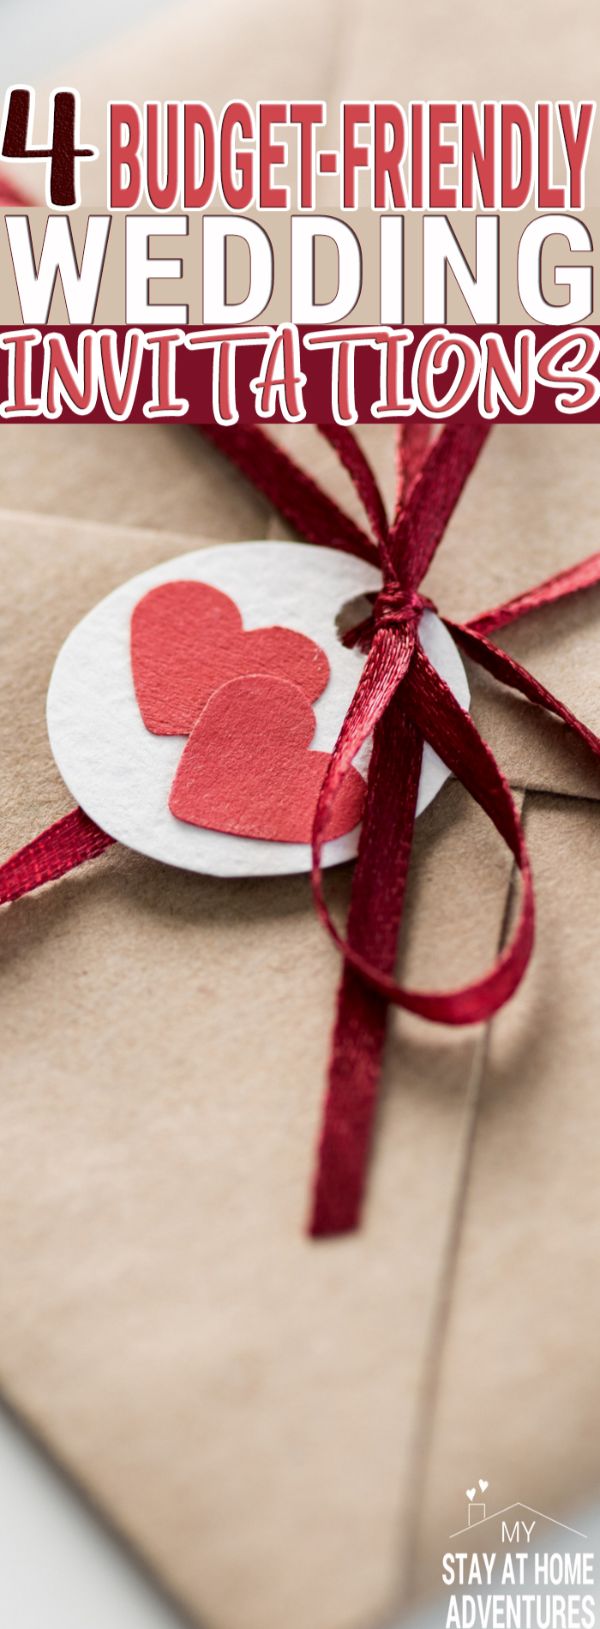 Find the best inexpensive wedding invitations that fit your budget, and some are even free! Learn what the best wedding invitations that will save you money. via @mystayathome